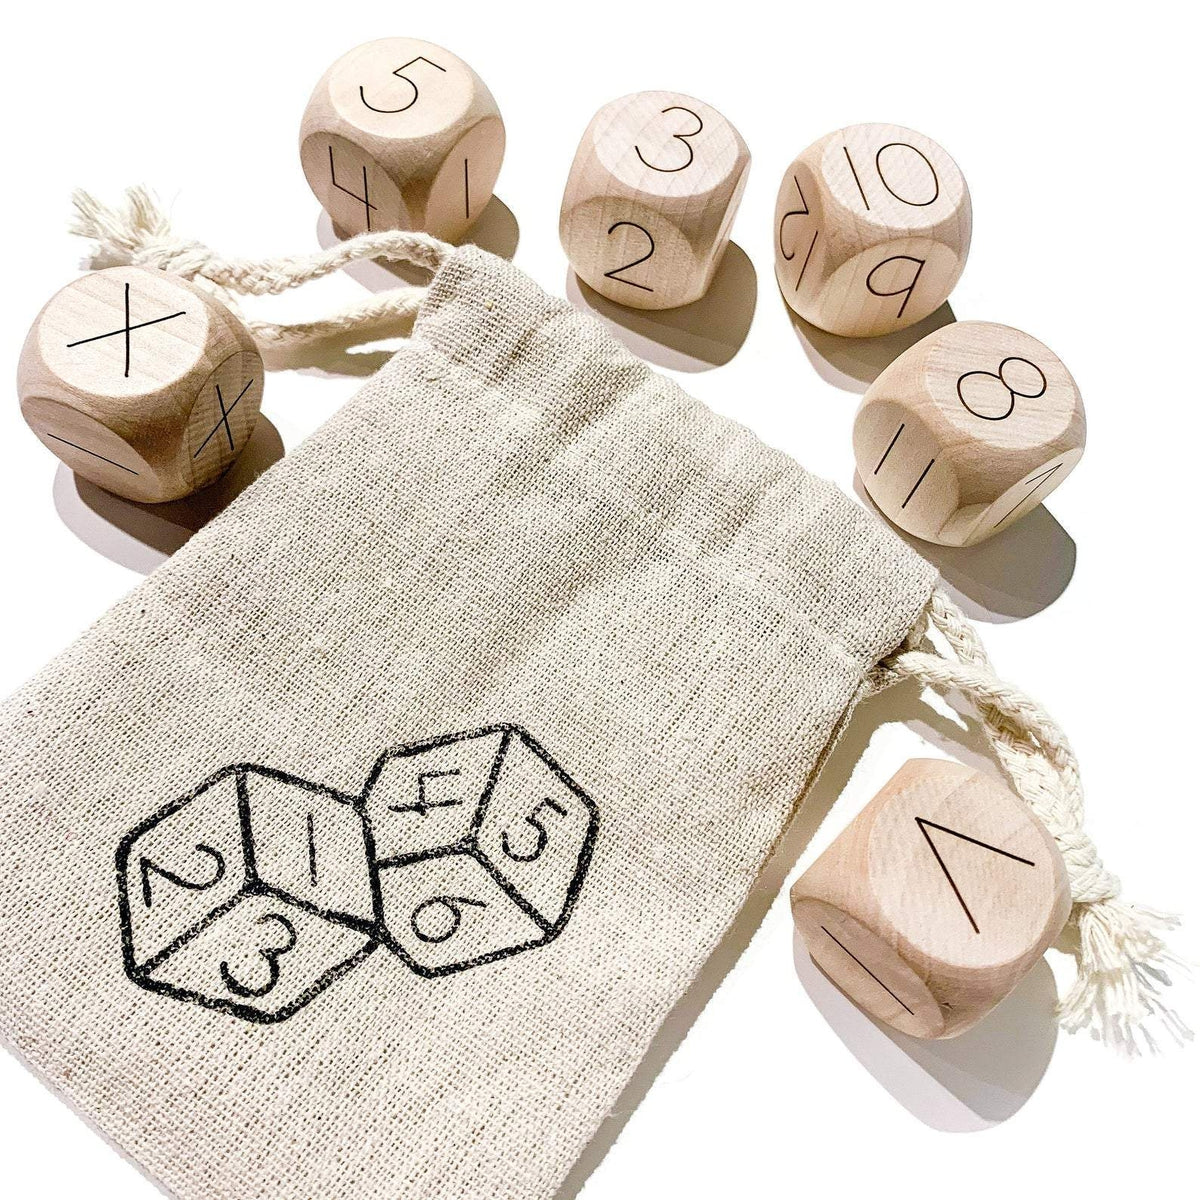  Homotte Wooden Yoga Dice Set For Kids, Fun Workout Game